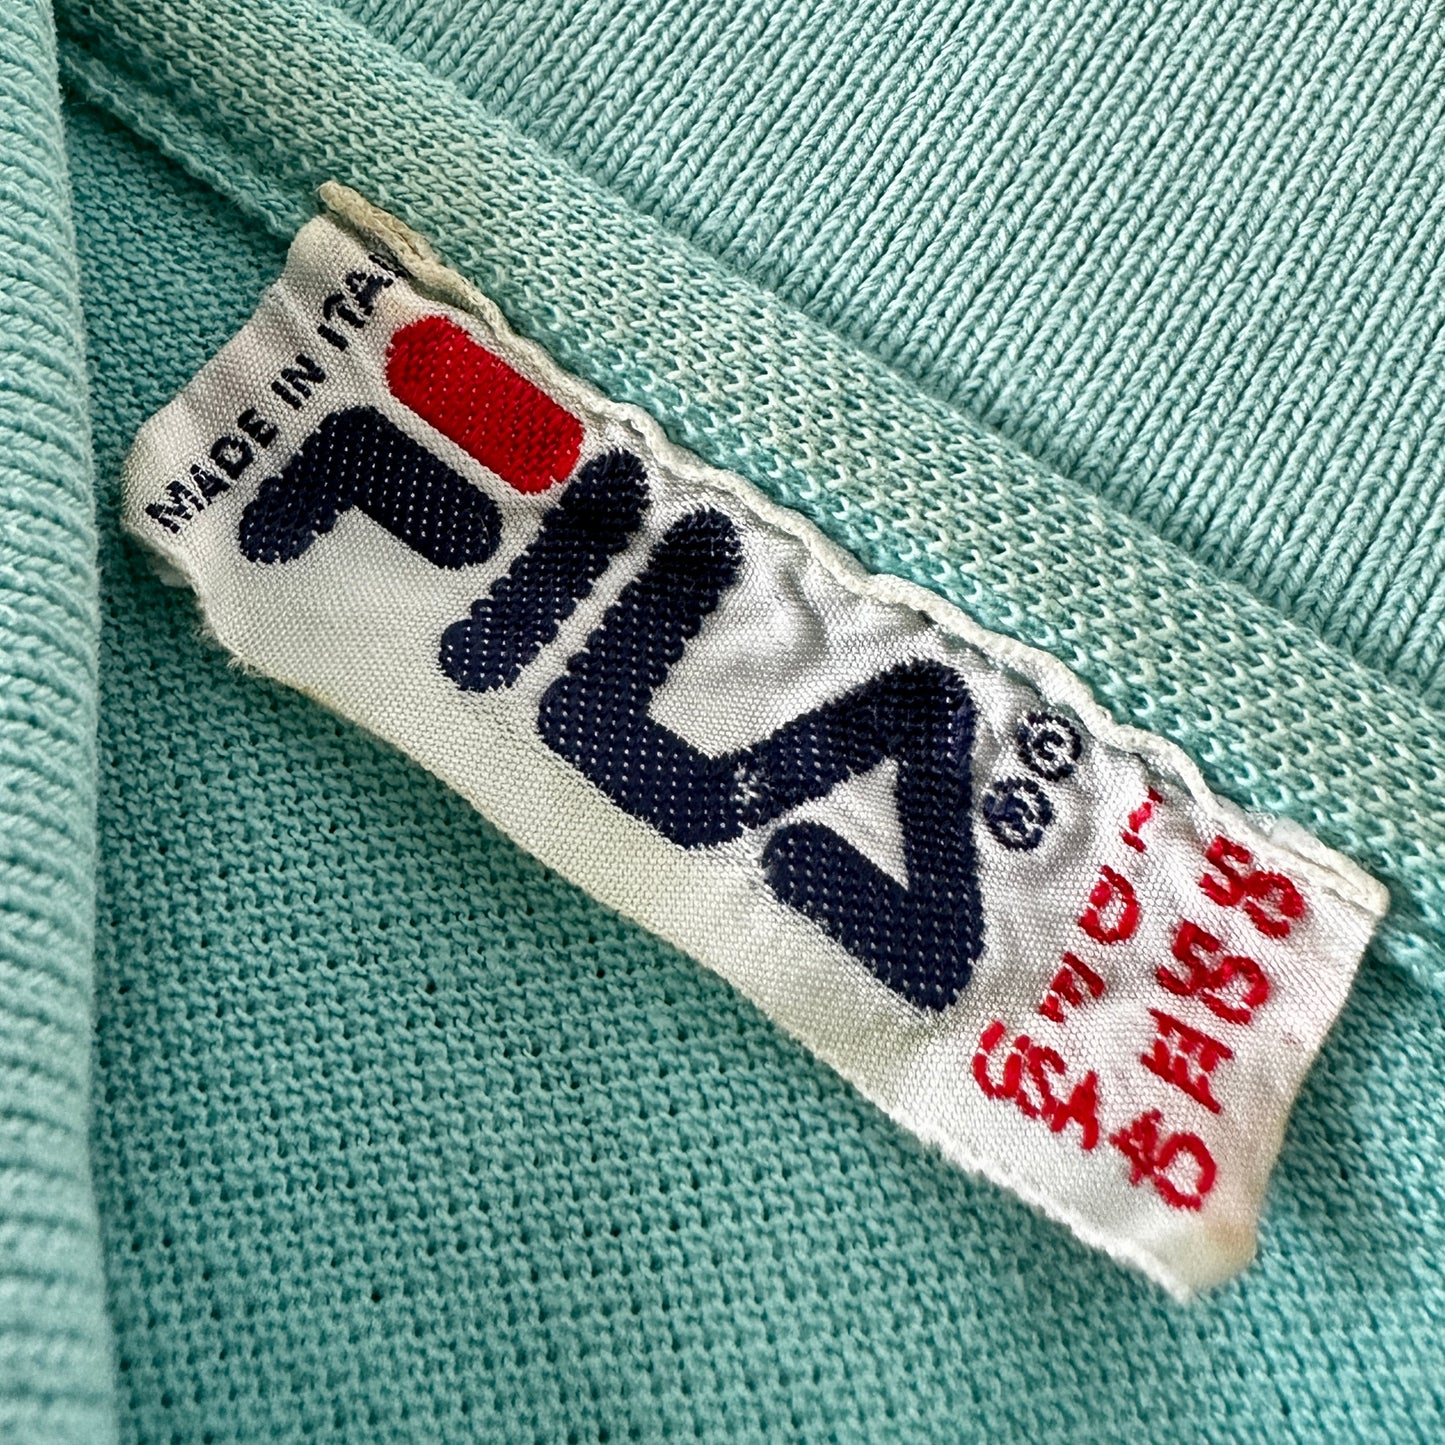 Fila Vintage 80s Polo Shirt - 50 / M - Made in Italy